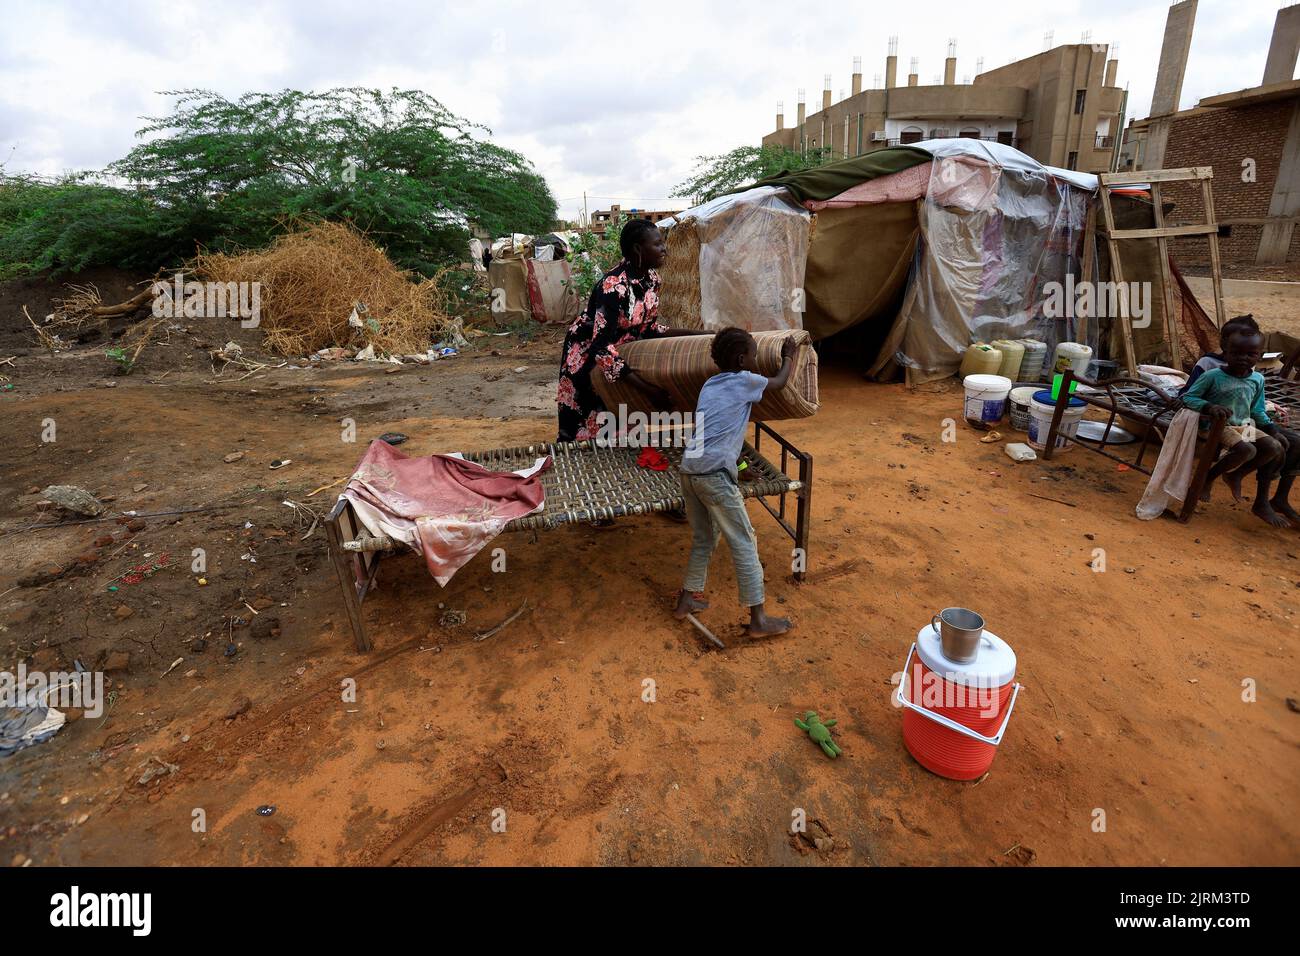 South Sudanese families who returned to Khartoum after the 2011 secession, live in a makeshift shelter in an abandoned plot of land in Bahri, Sudan, August 11, 2022. REUTERS/Mohamed Nureldin Abdallah Stock Photo